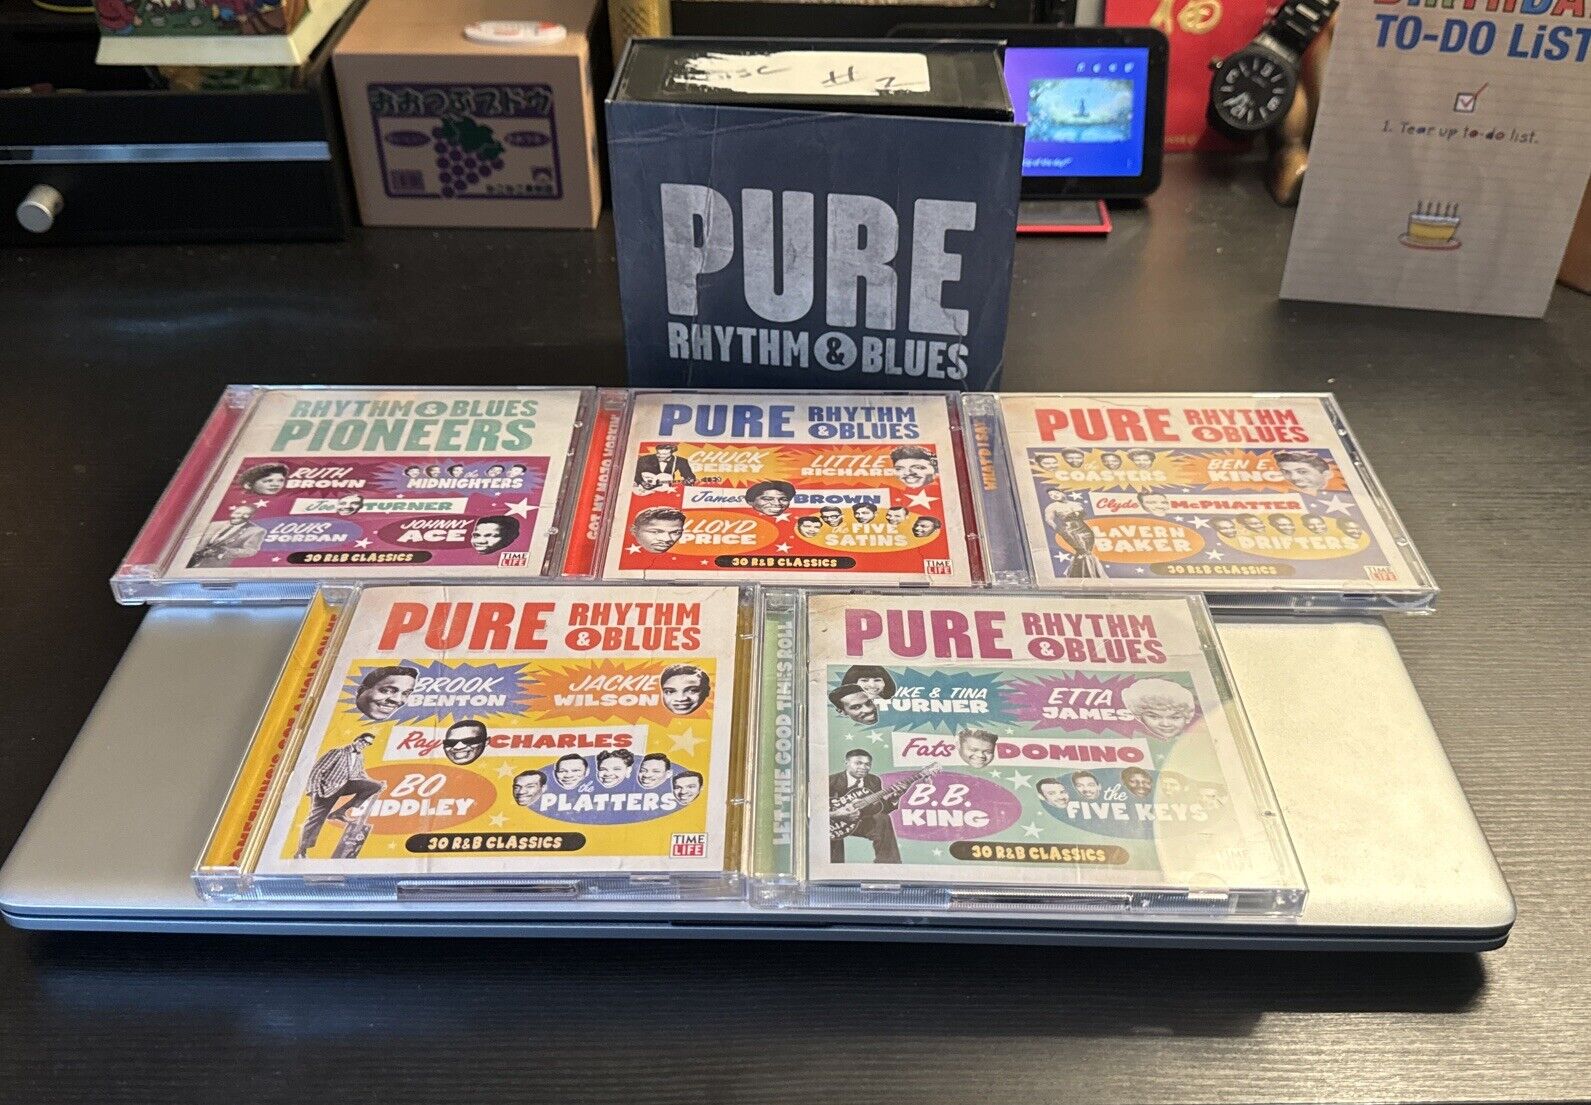 PURE RHYTHM & BLUES  (2010) -  10 CD COLLECTION